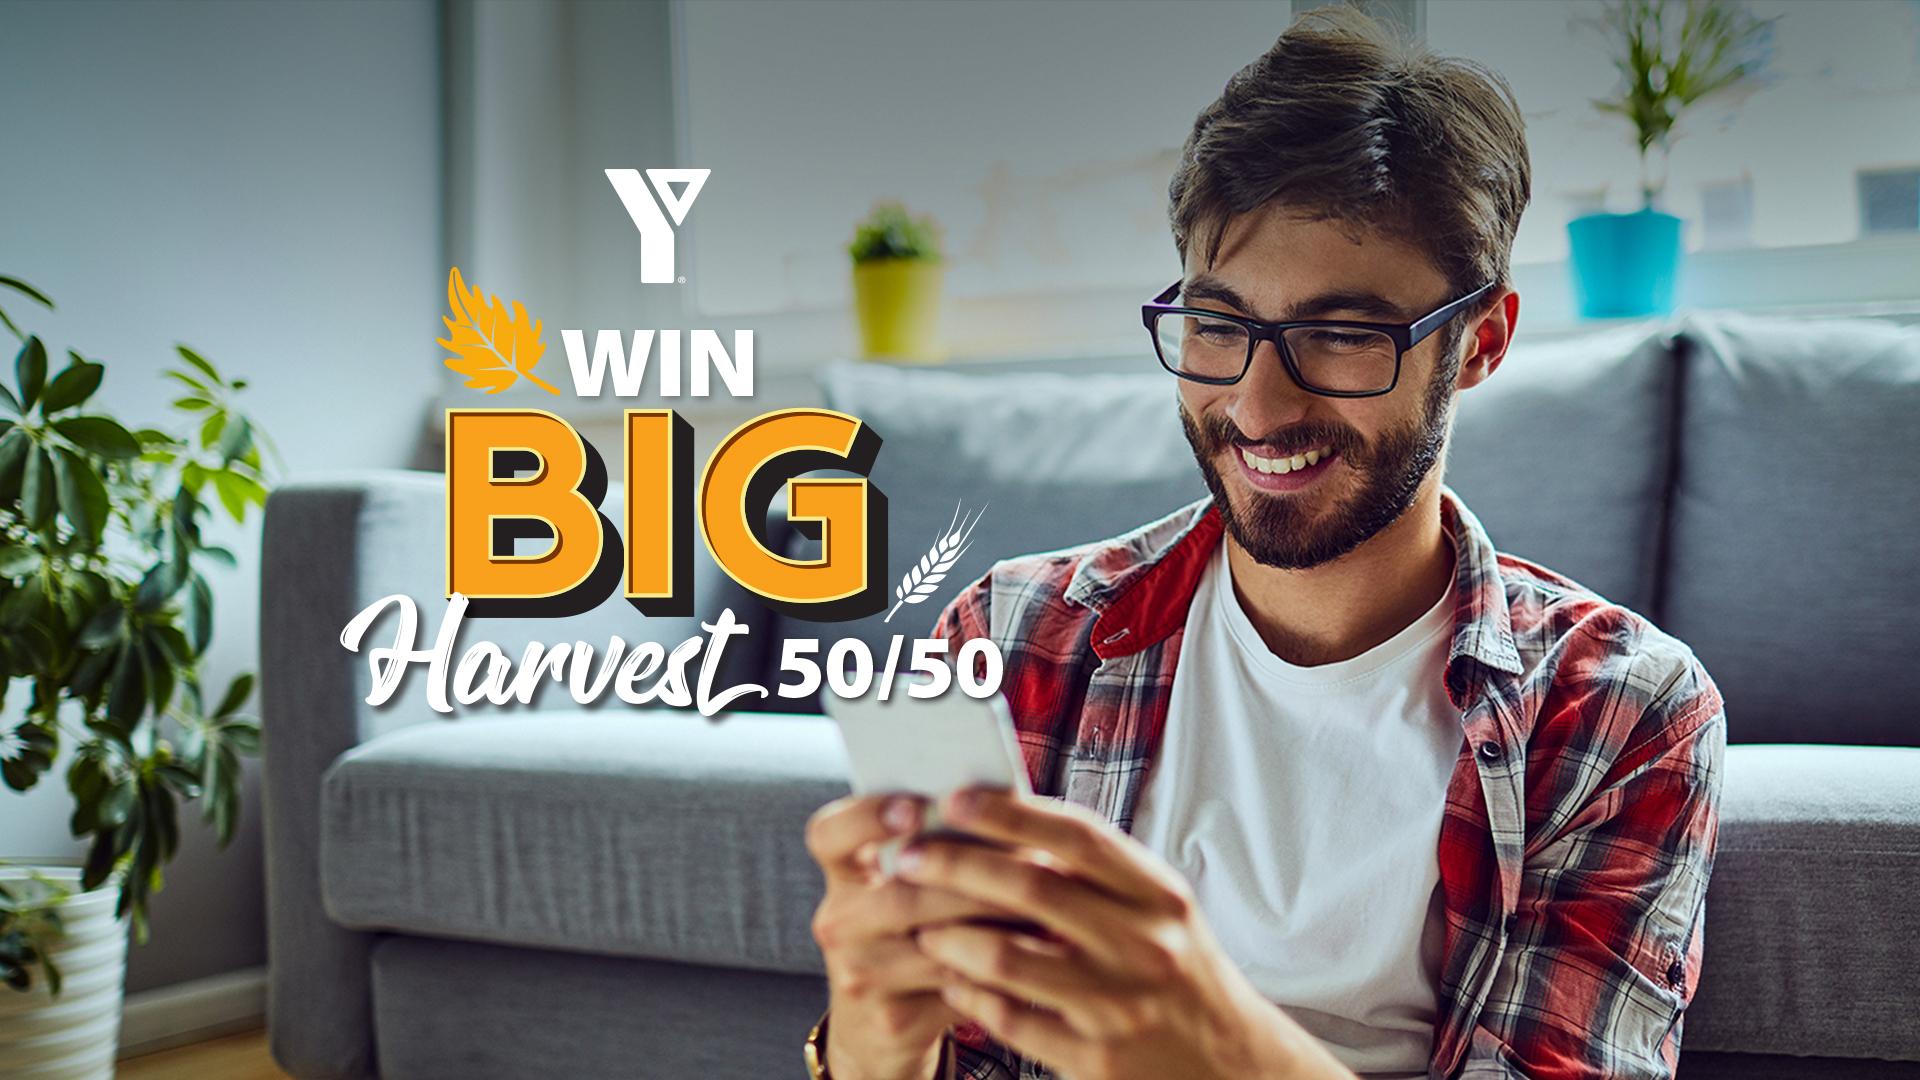 Adult male smiling at phone with text Win Big Harvest 50/50